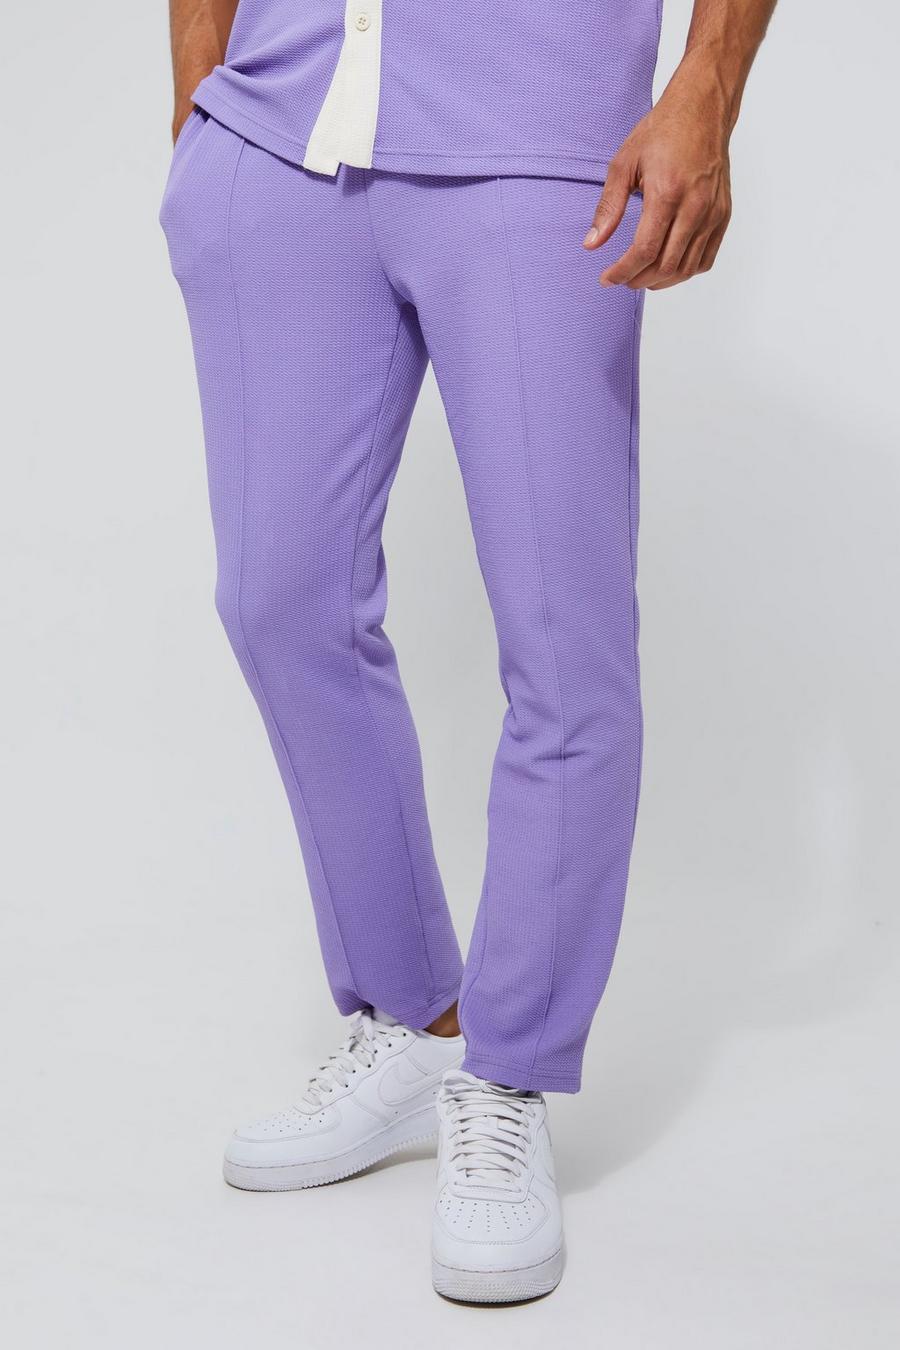 Lilac purple Elasticated Skinny Jersey Textured Trouser